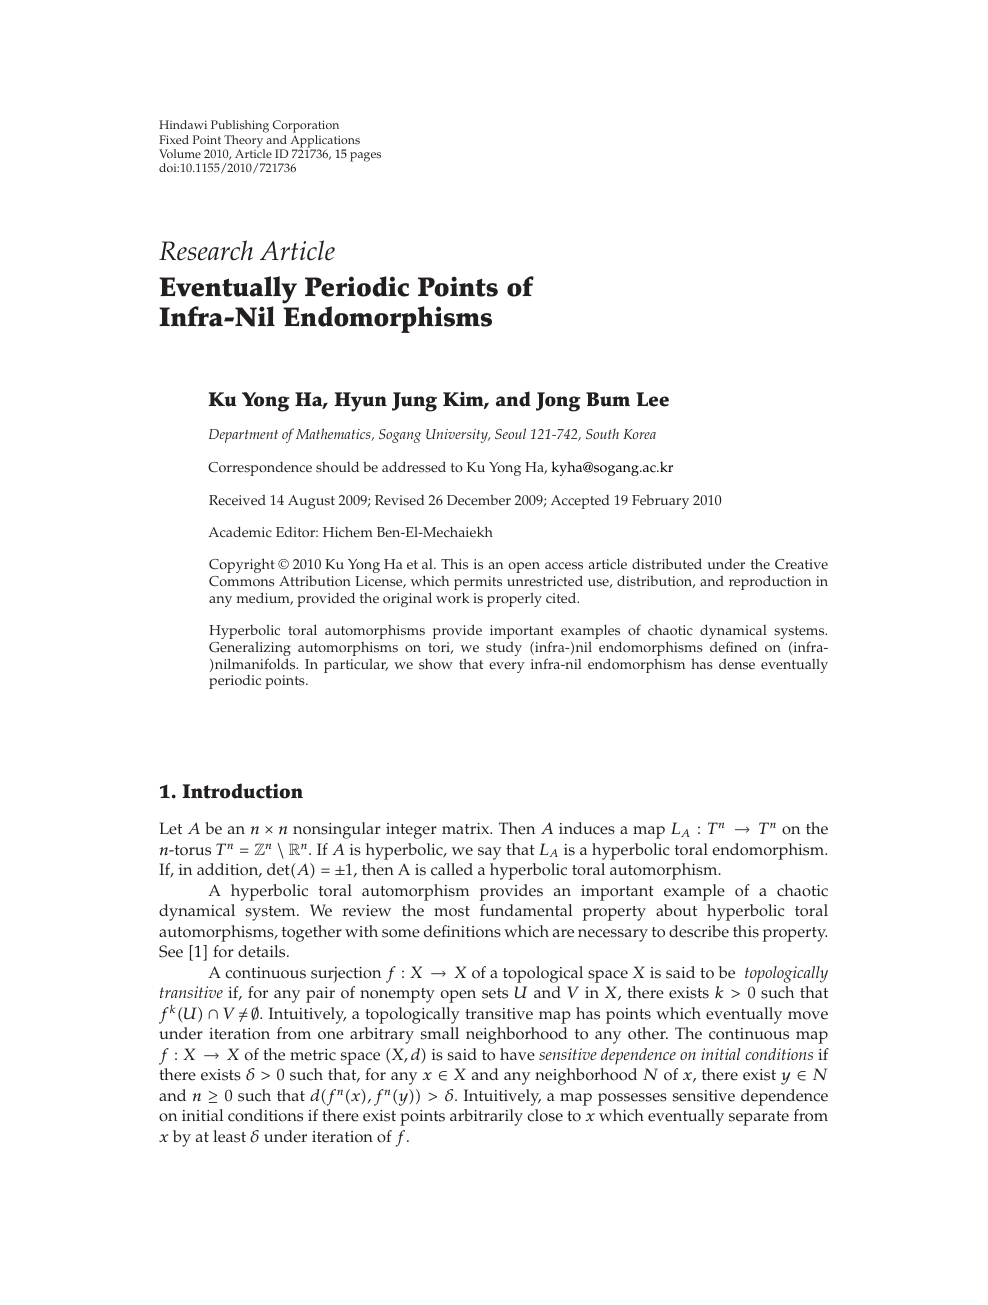 Eventually Periodic Points Of Infra Nil Endomorphisms Topic Of Research Paper In Mathematics Download Scholarly Article Pdf And Read For Free On Cyberleninka Open Science Hub